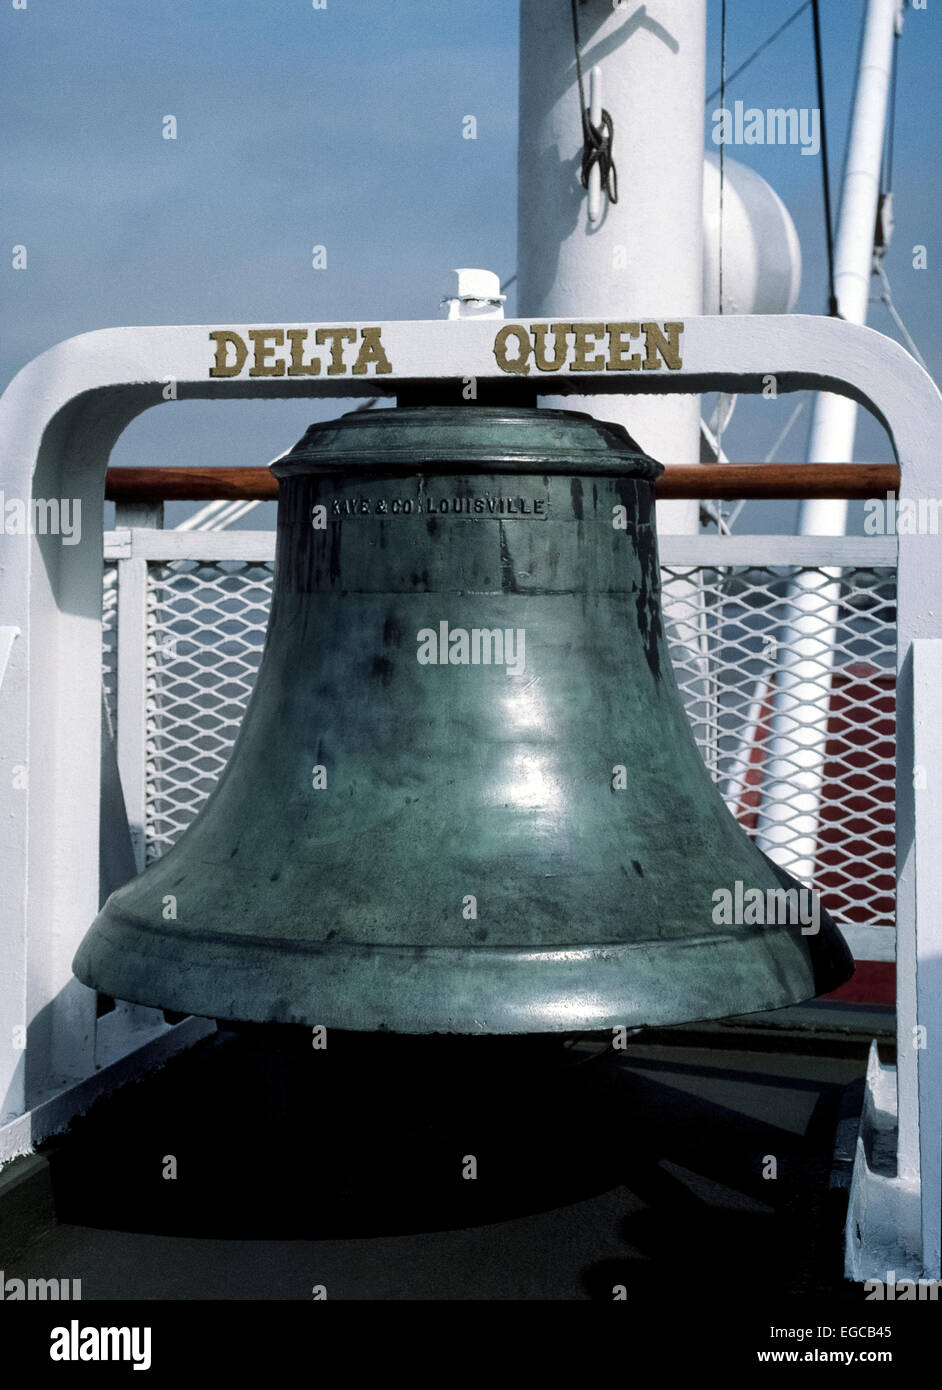 This large ship's bell is outdoors on the upper deck of the Delta Queen, an American paddle-wheel steamboat launched in 1926 and has since become a floating dockside hotel in Chattanooga, Tennessee, USA. The bronze bell was made by Kaye & Co. of Louisville, Kentucky, in 1883 and saw service on several vessels before being installed on the Delta Queen in 1947. Stock Photo